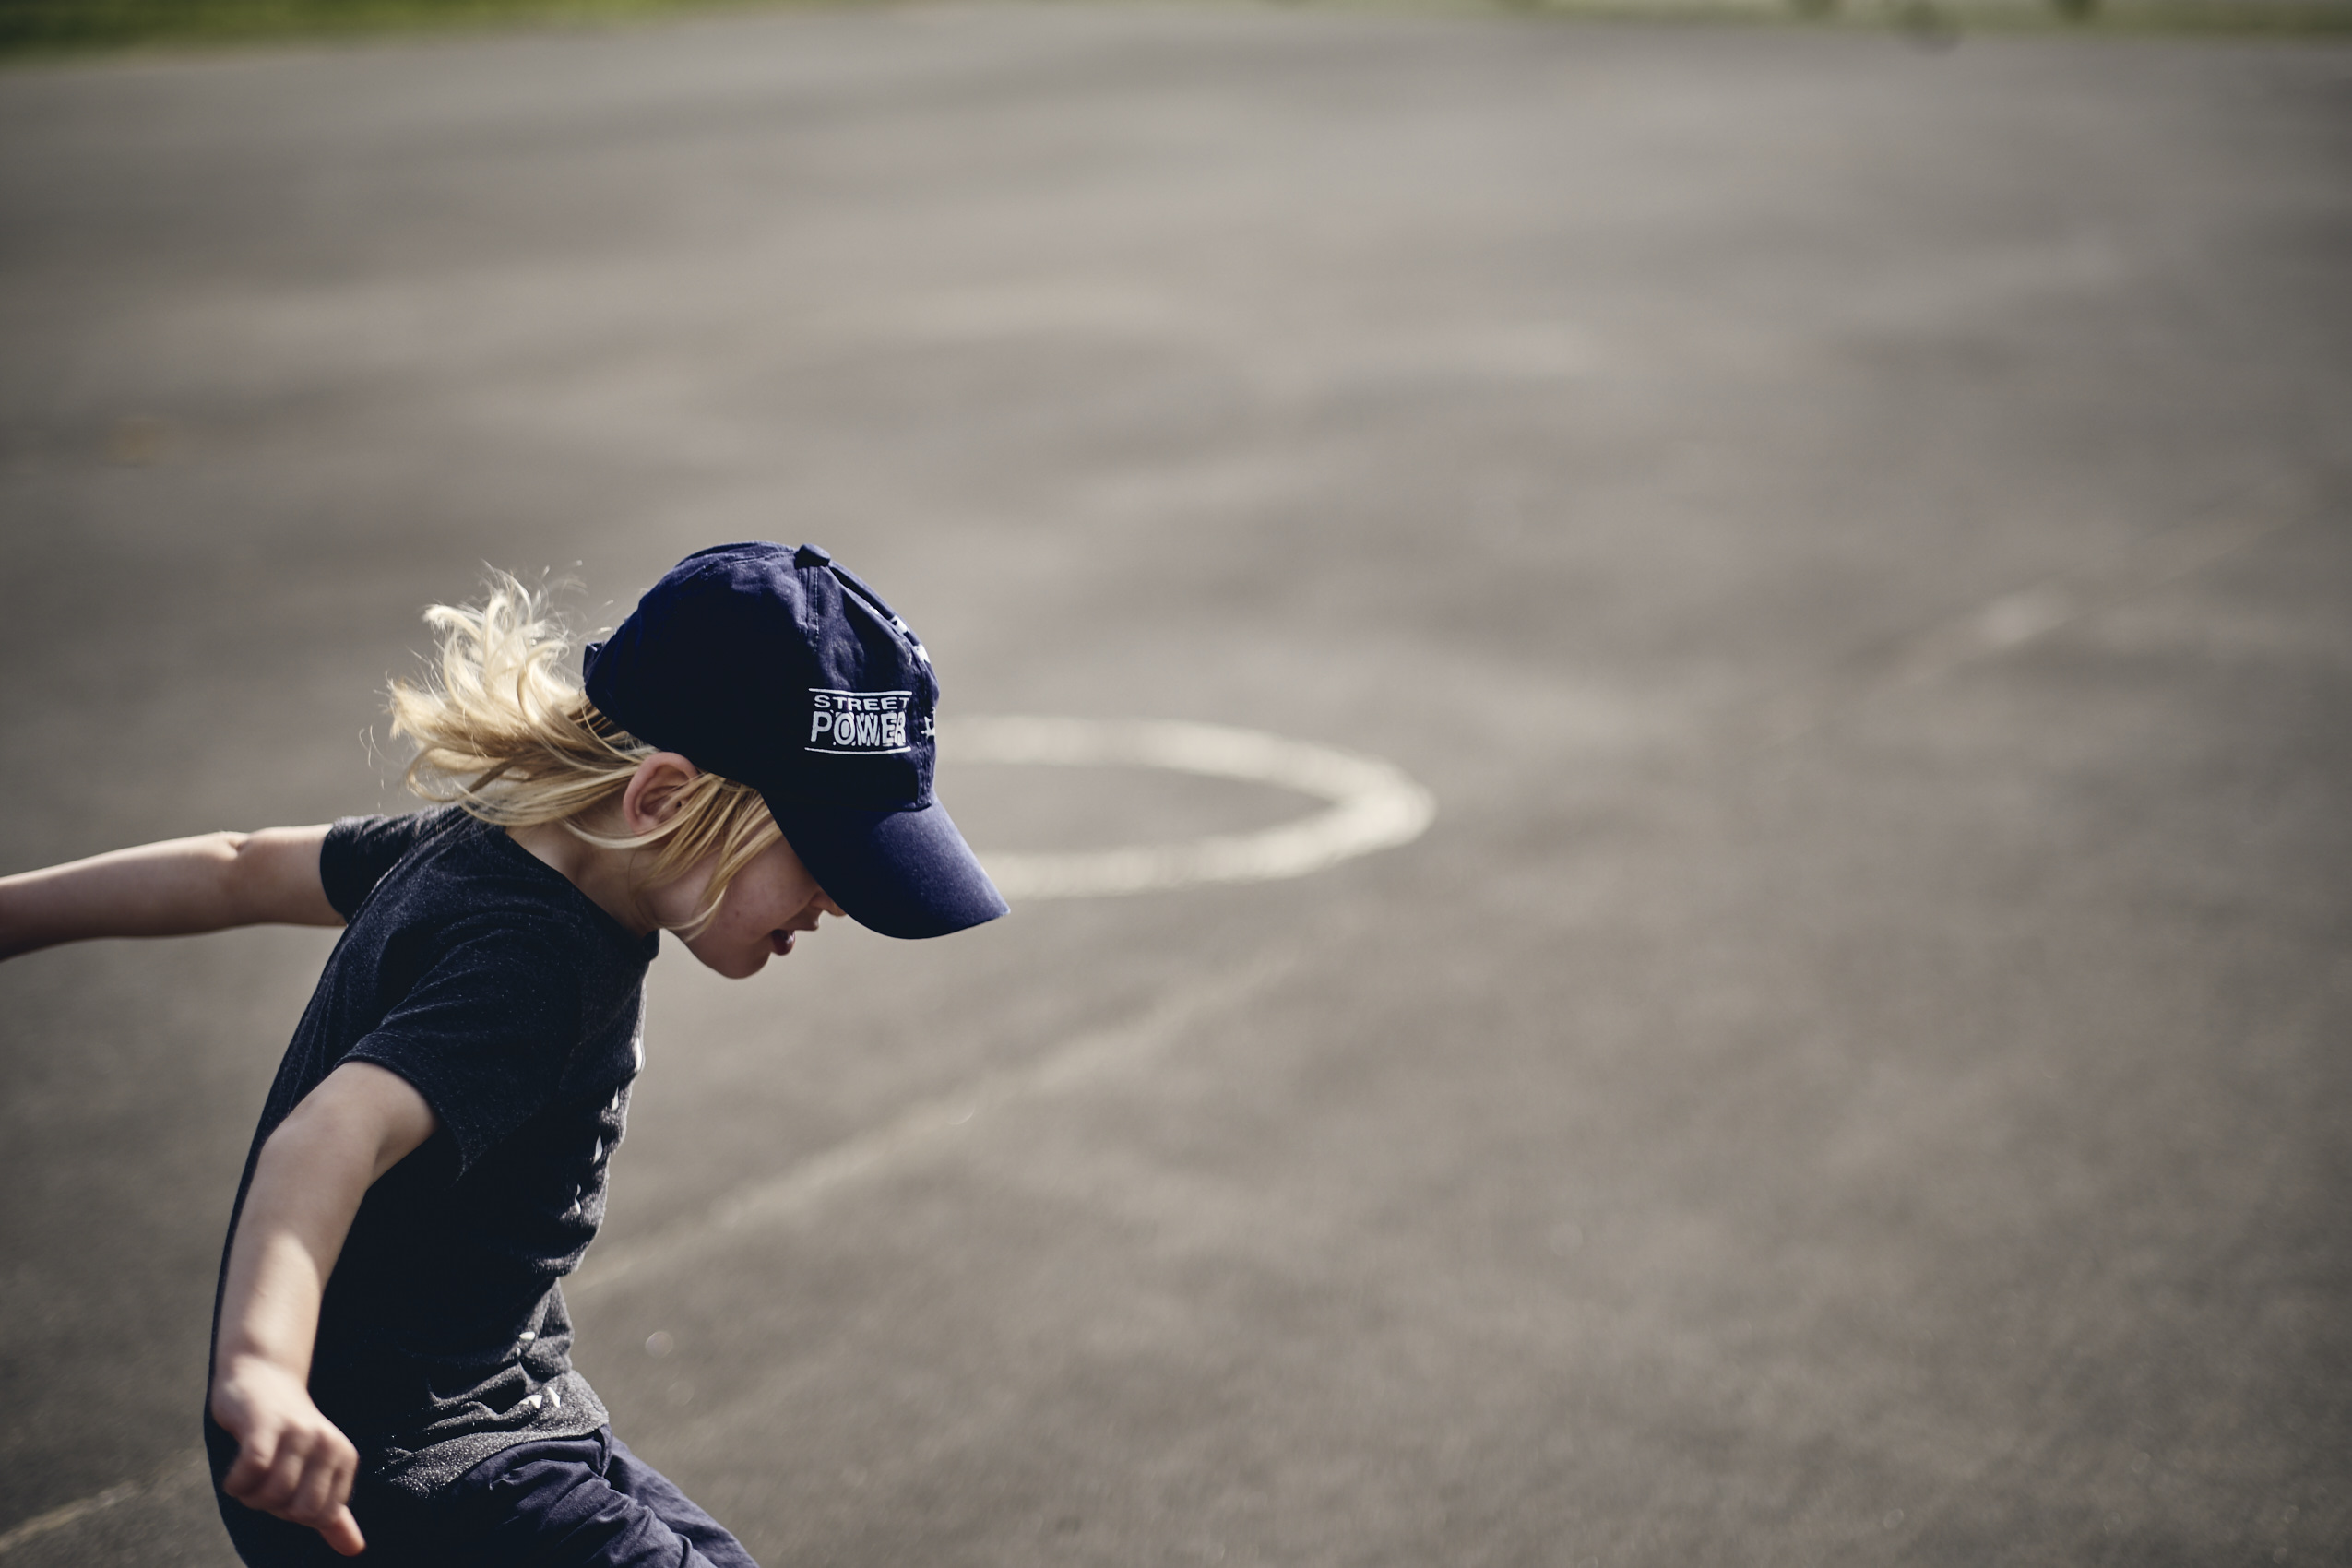 Lockdown • Young Boy in Cap Jumping on Asphalt • Lifestyle & Portrait Photography